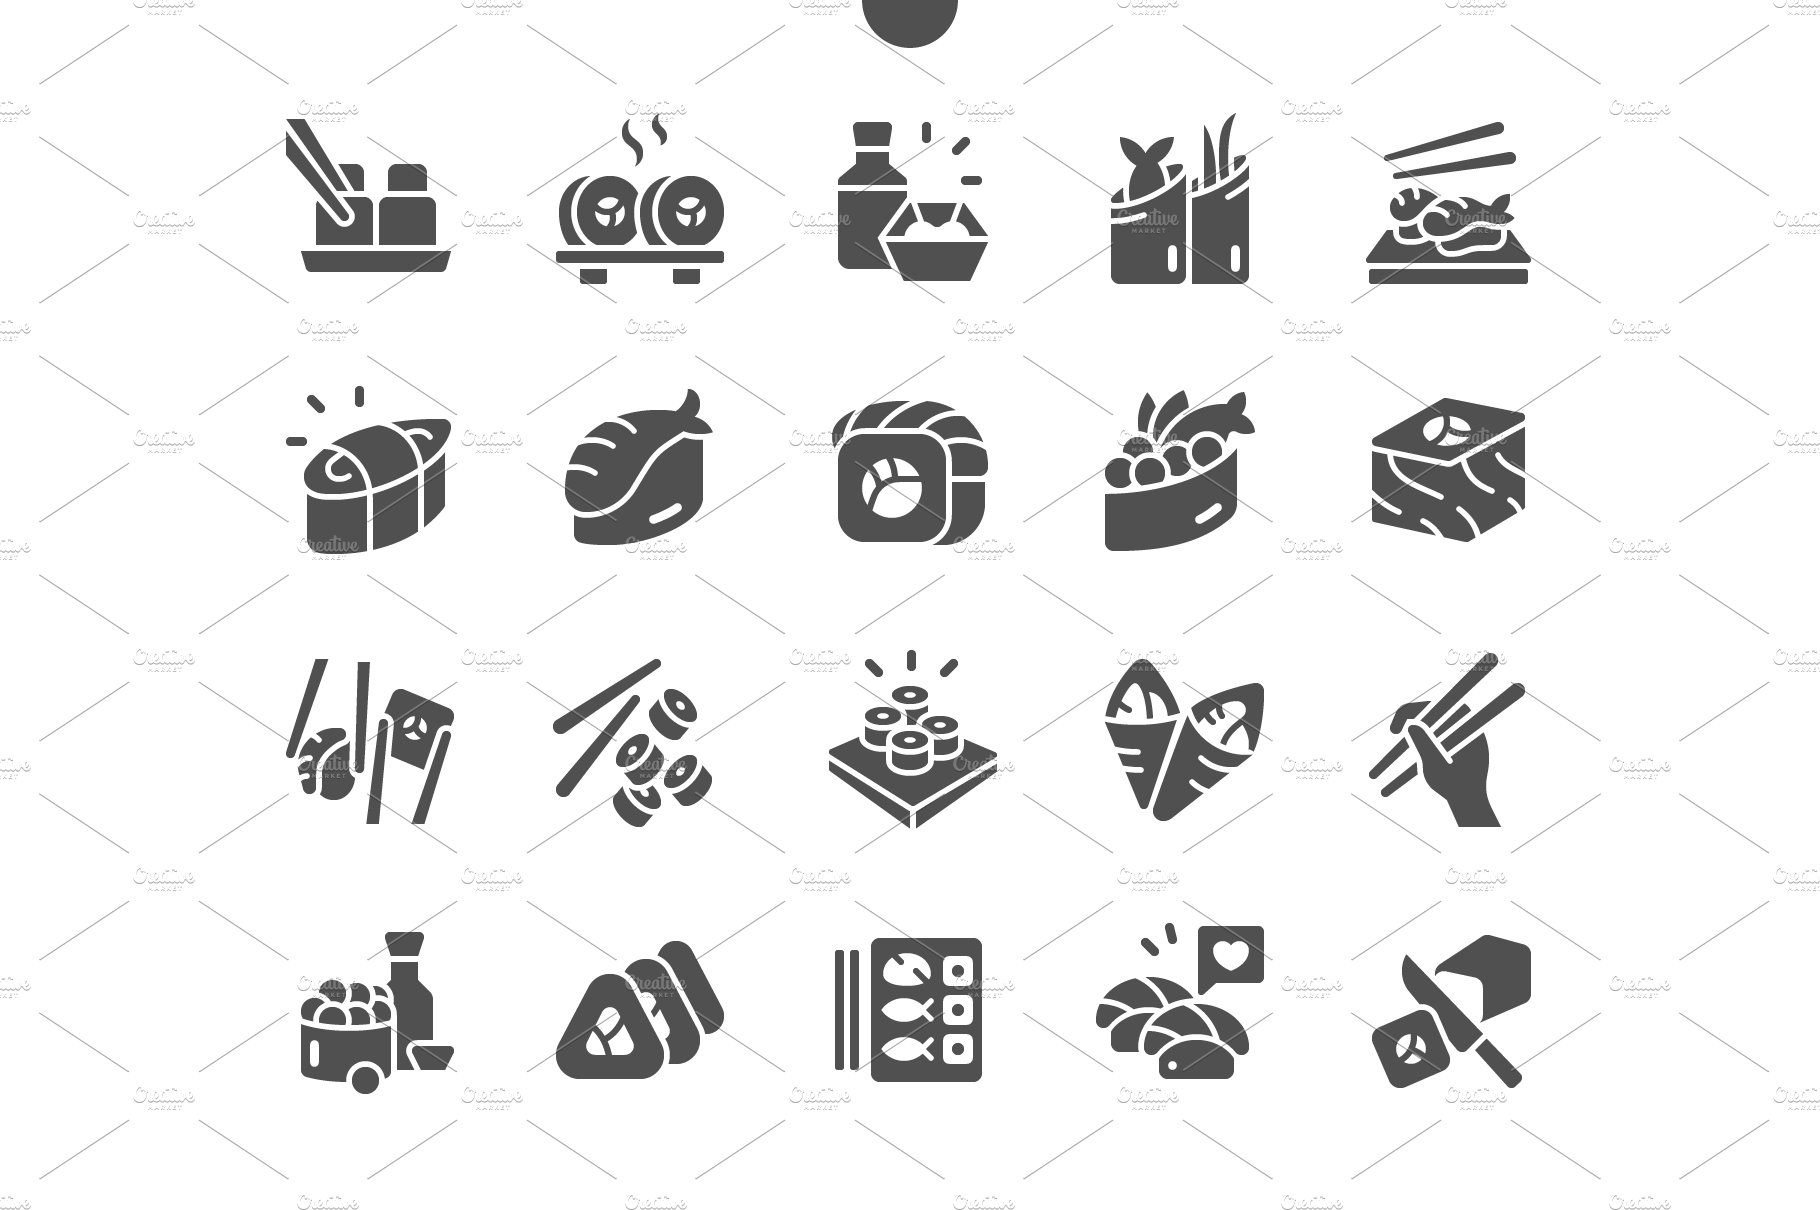 Sushi Icons cover image.